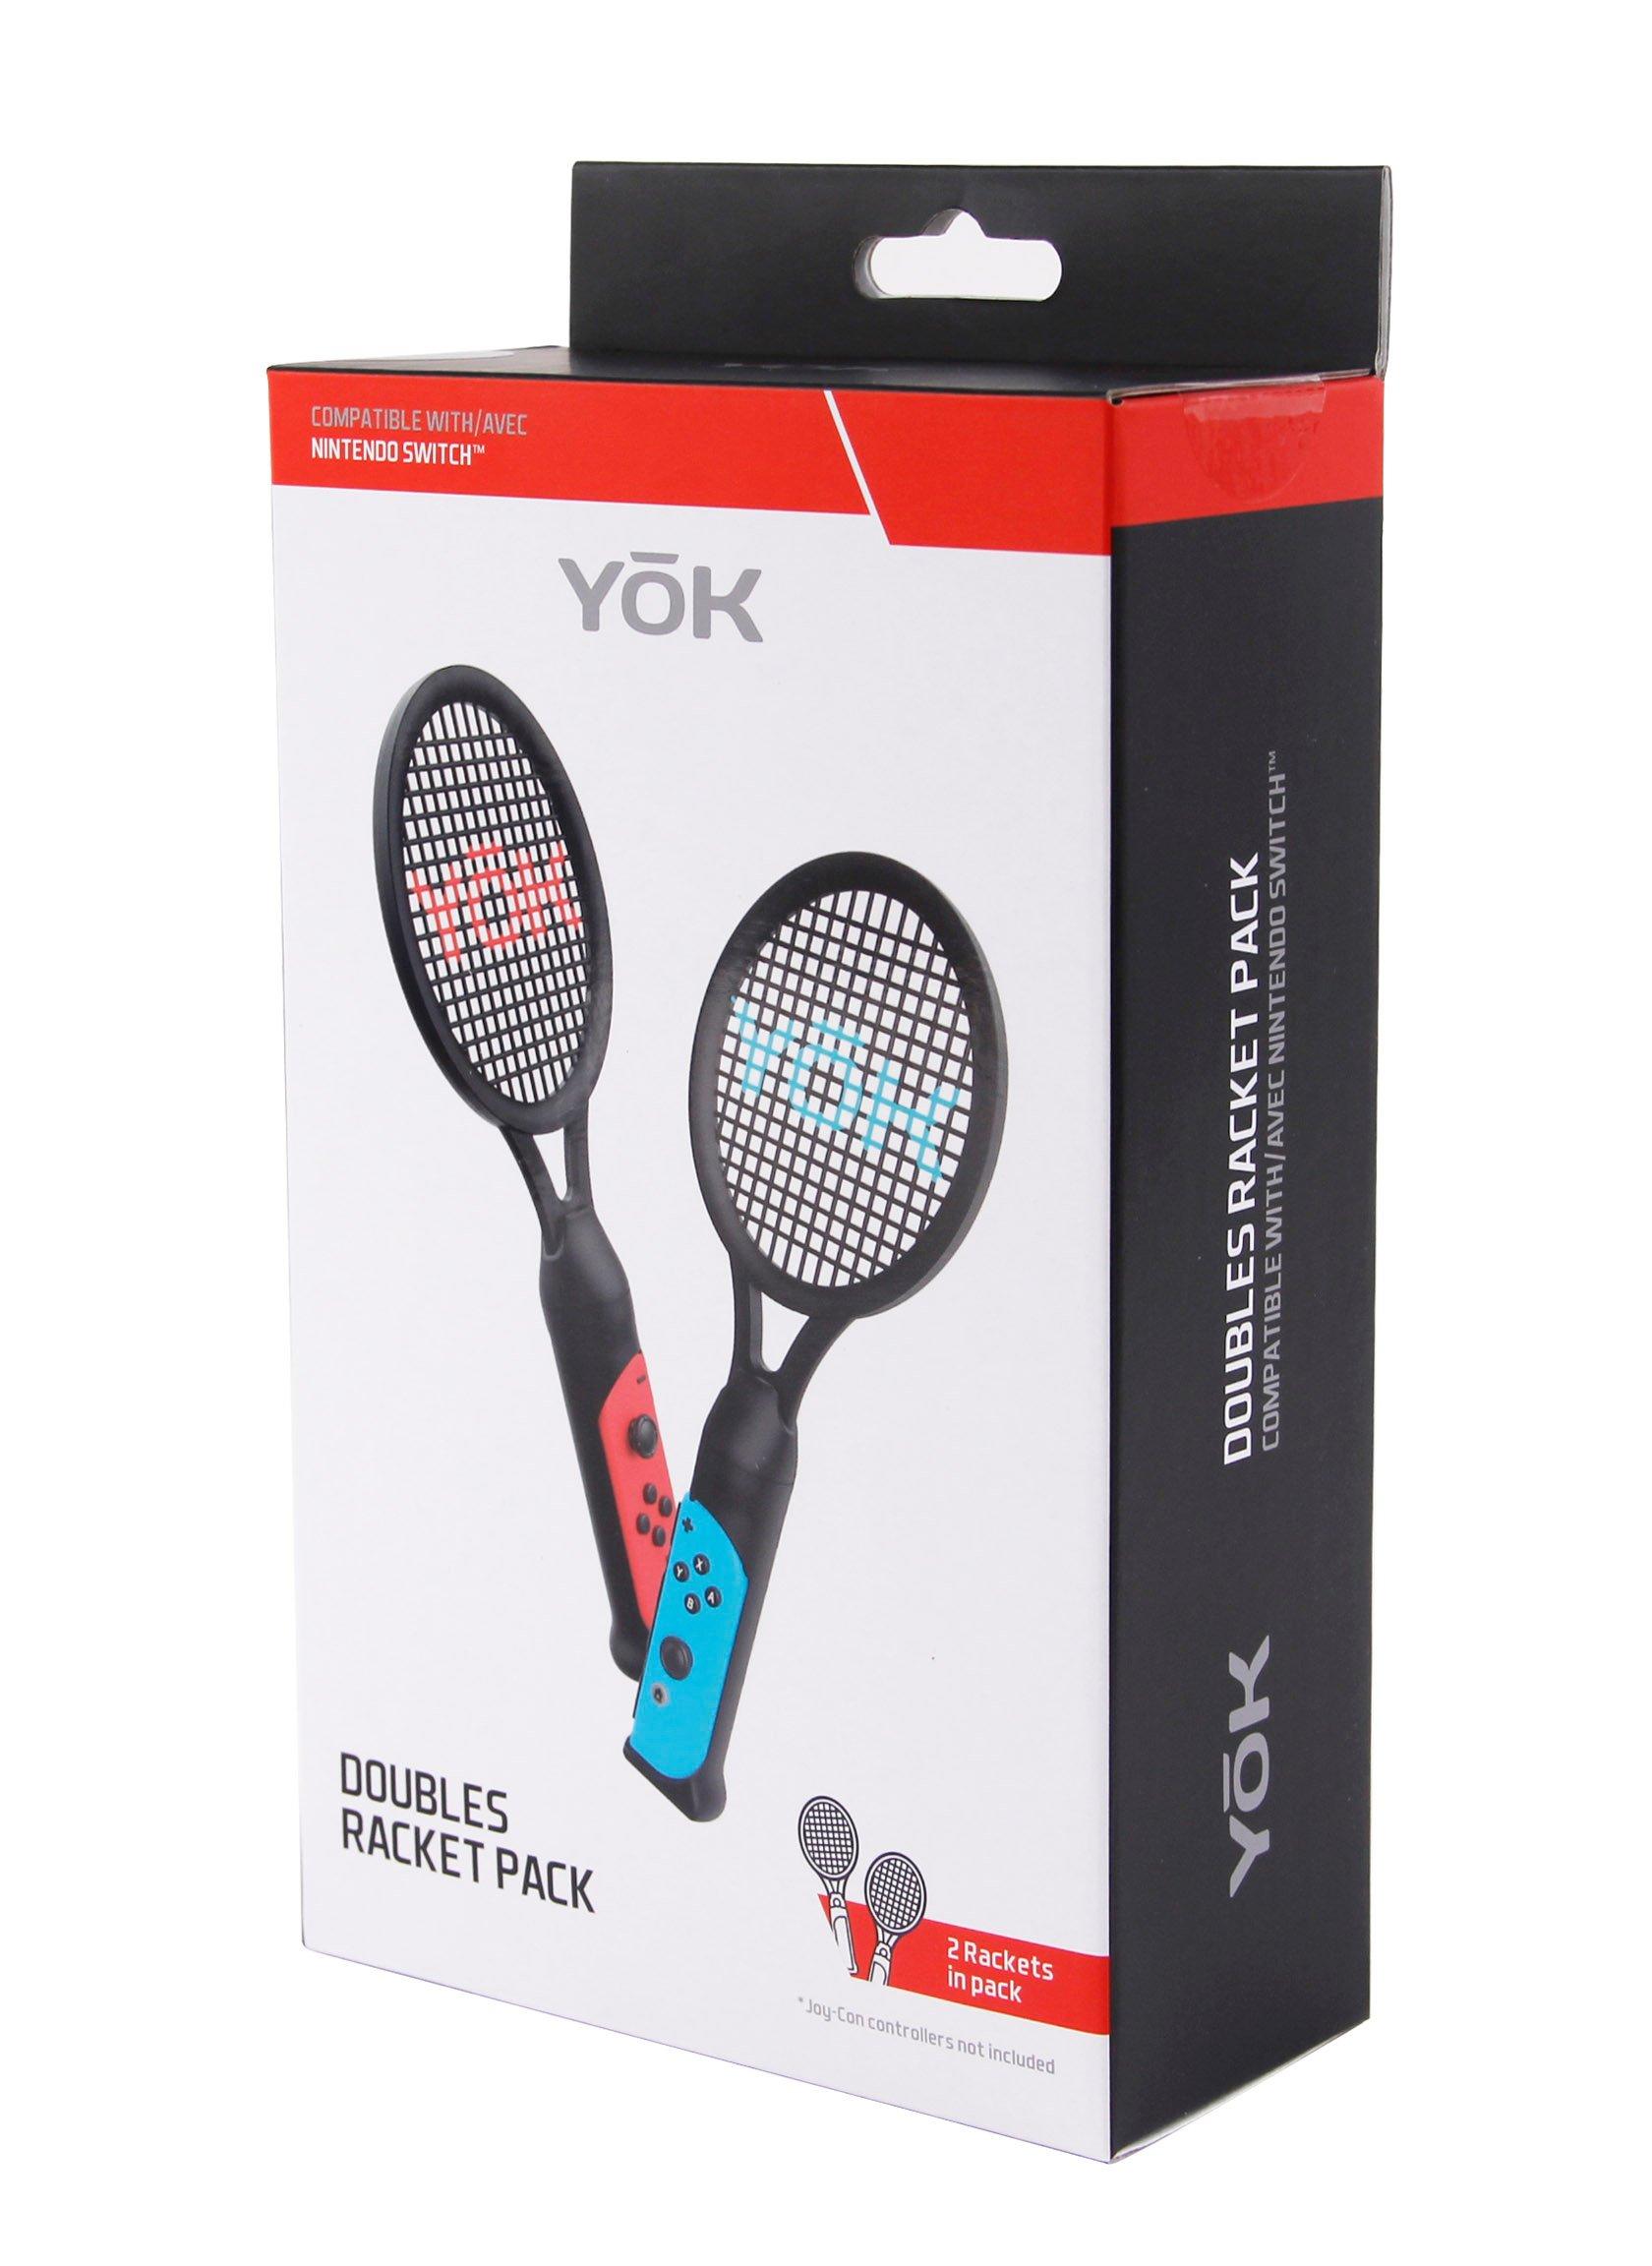 Tennis Racket 2 Pack for Nintendo Switch